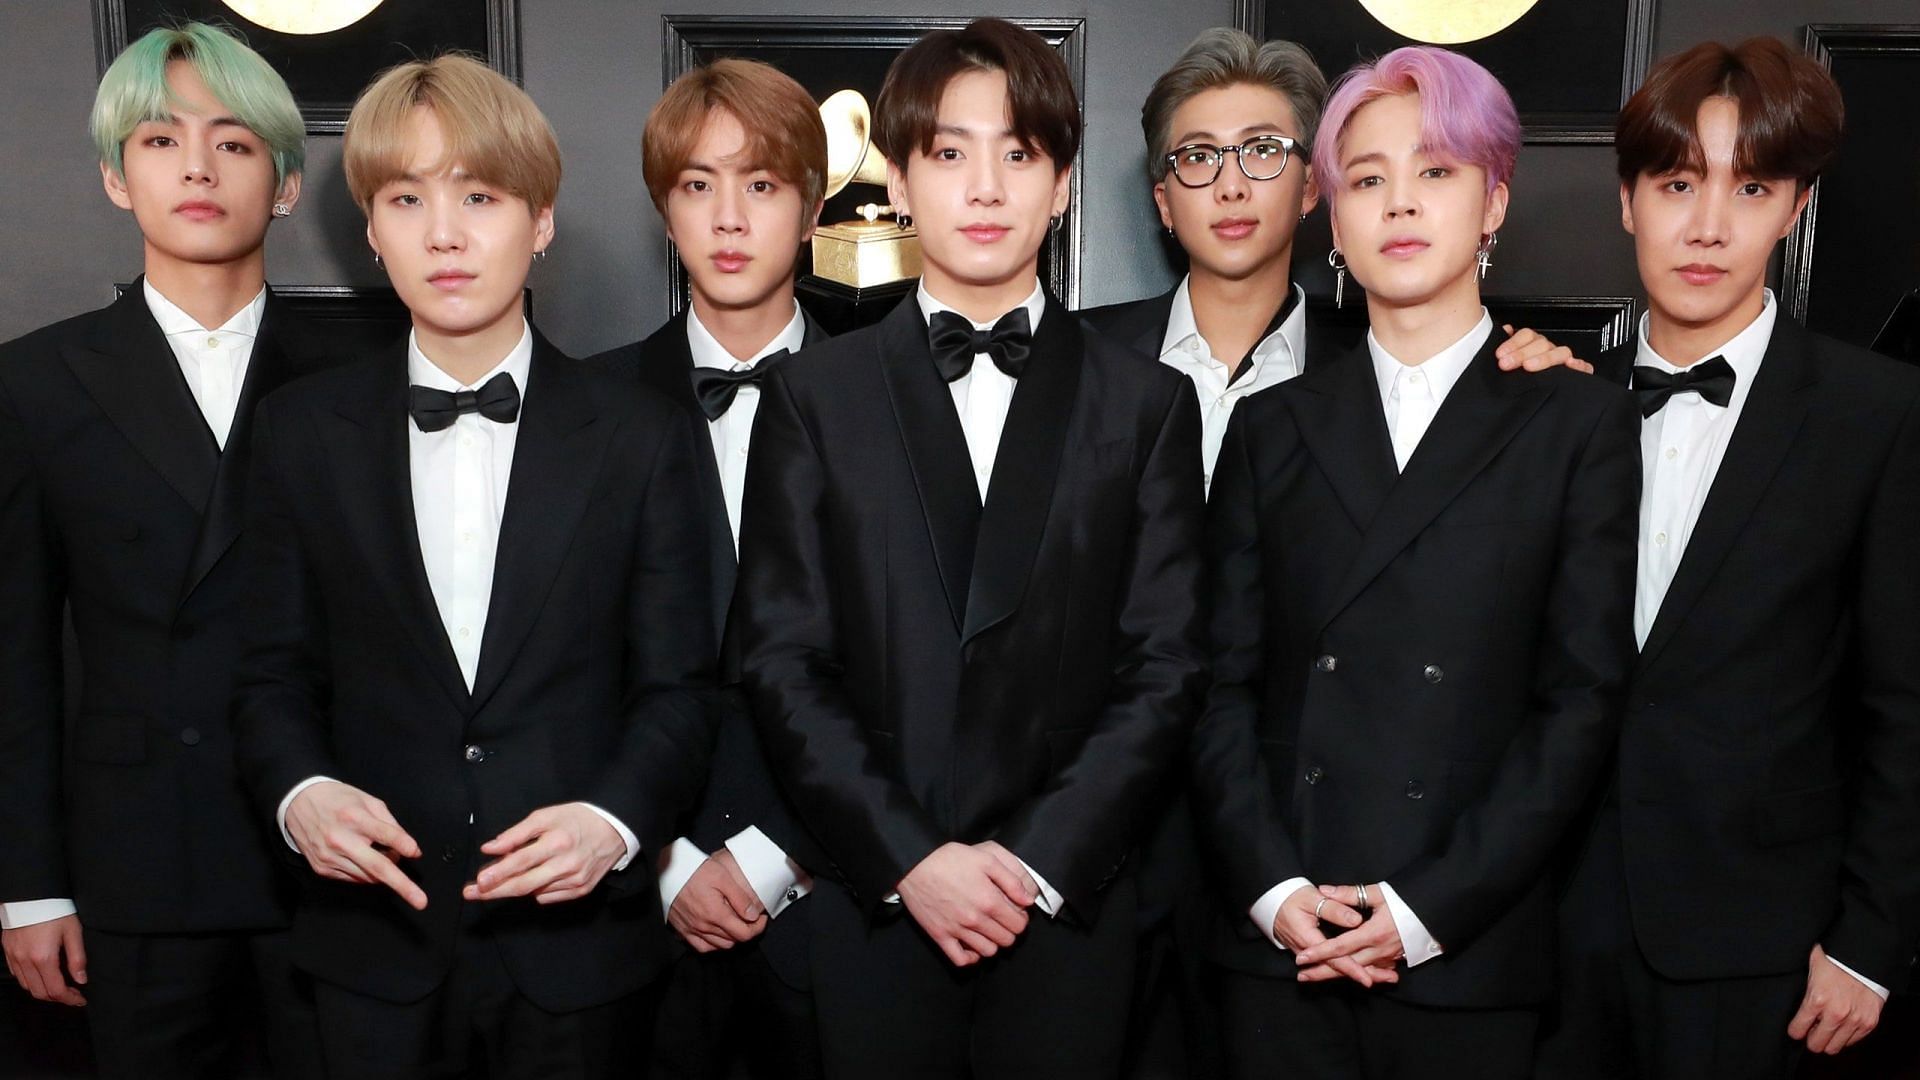 BTS interact with their fans on various apps (Image via Rich Fury/Getty Images)